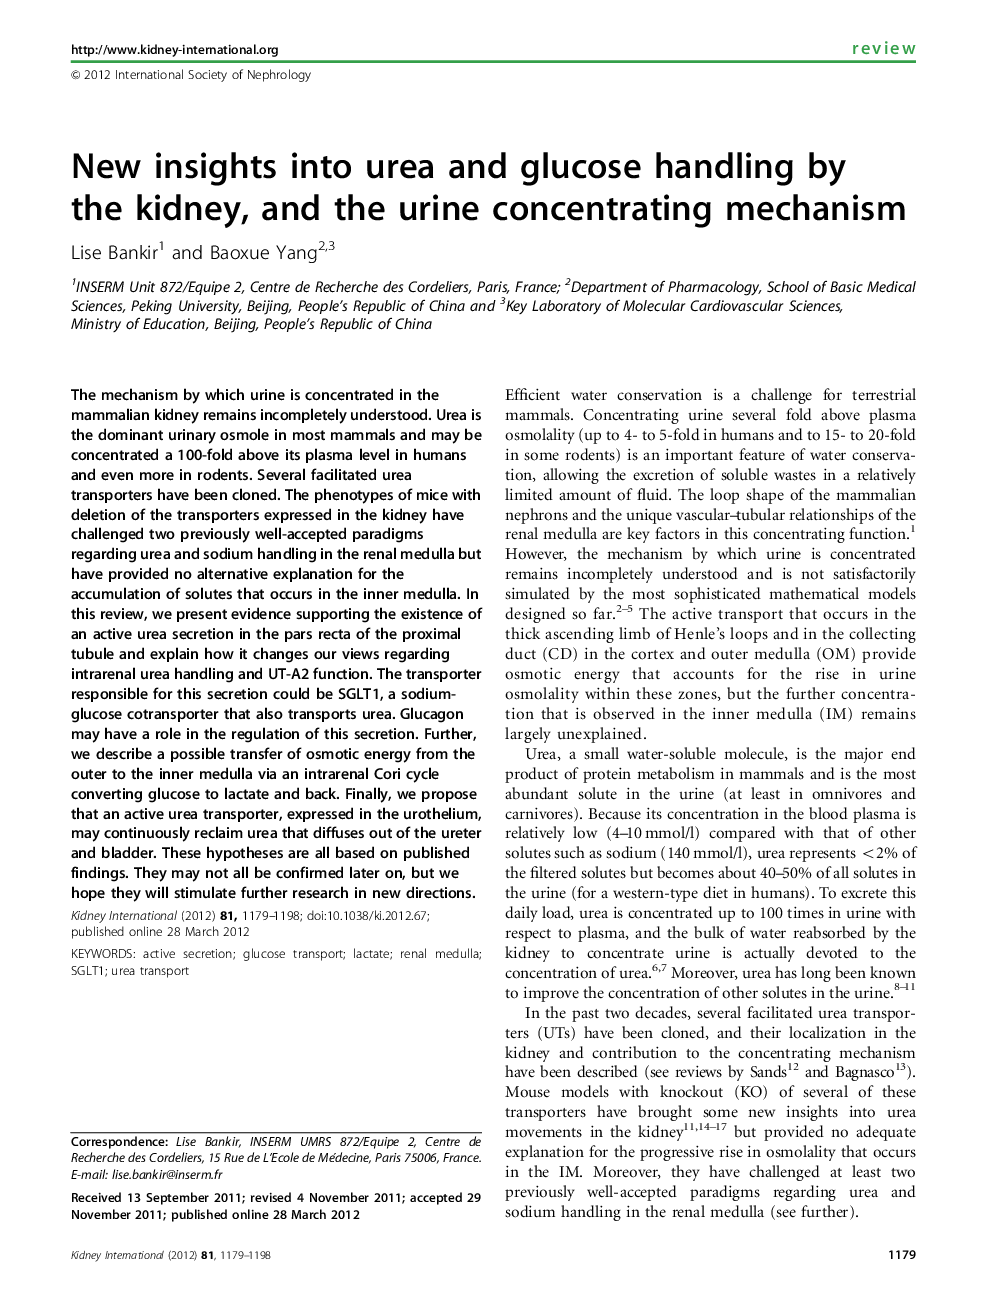 New insights into urea and glucose handling by the kidney, and the urine concentrating mechanism